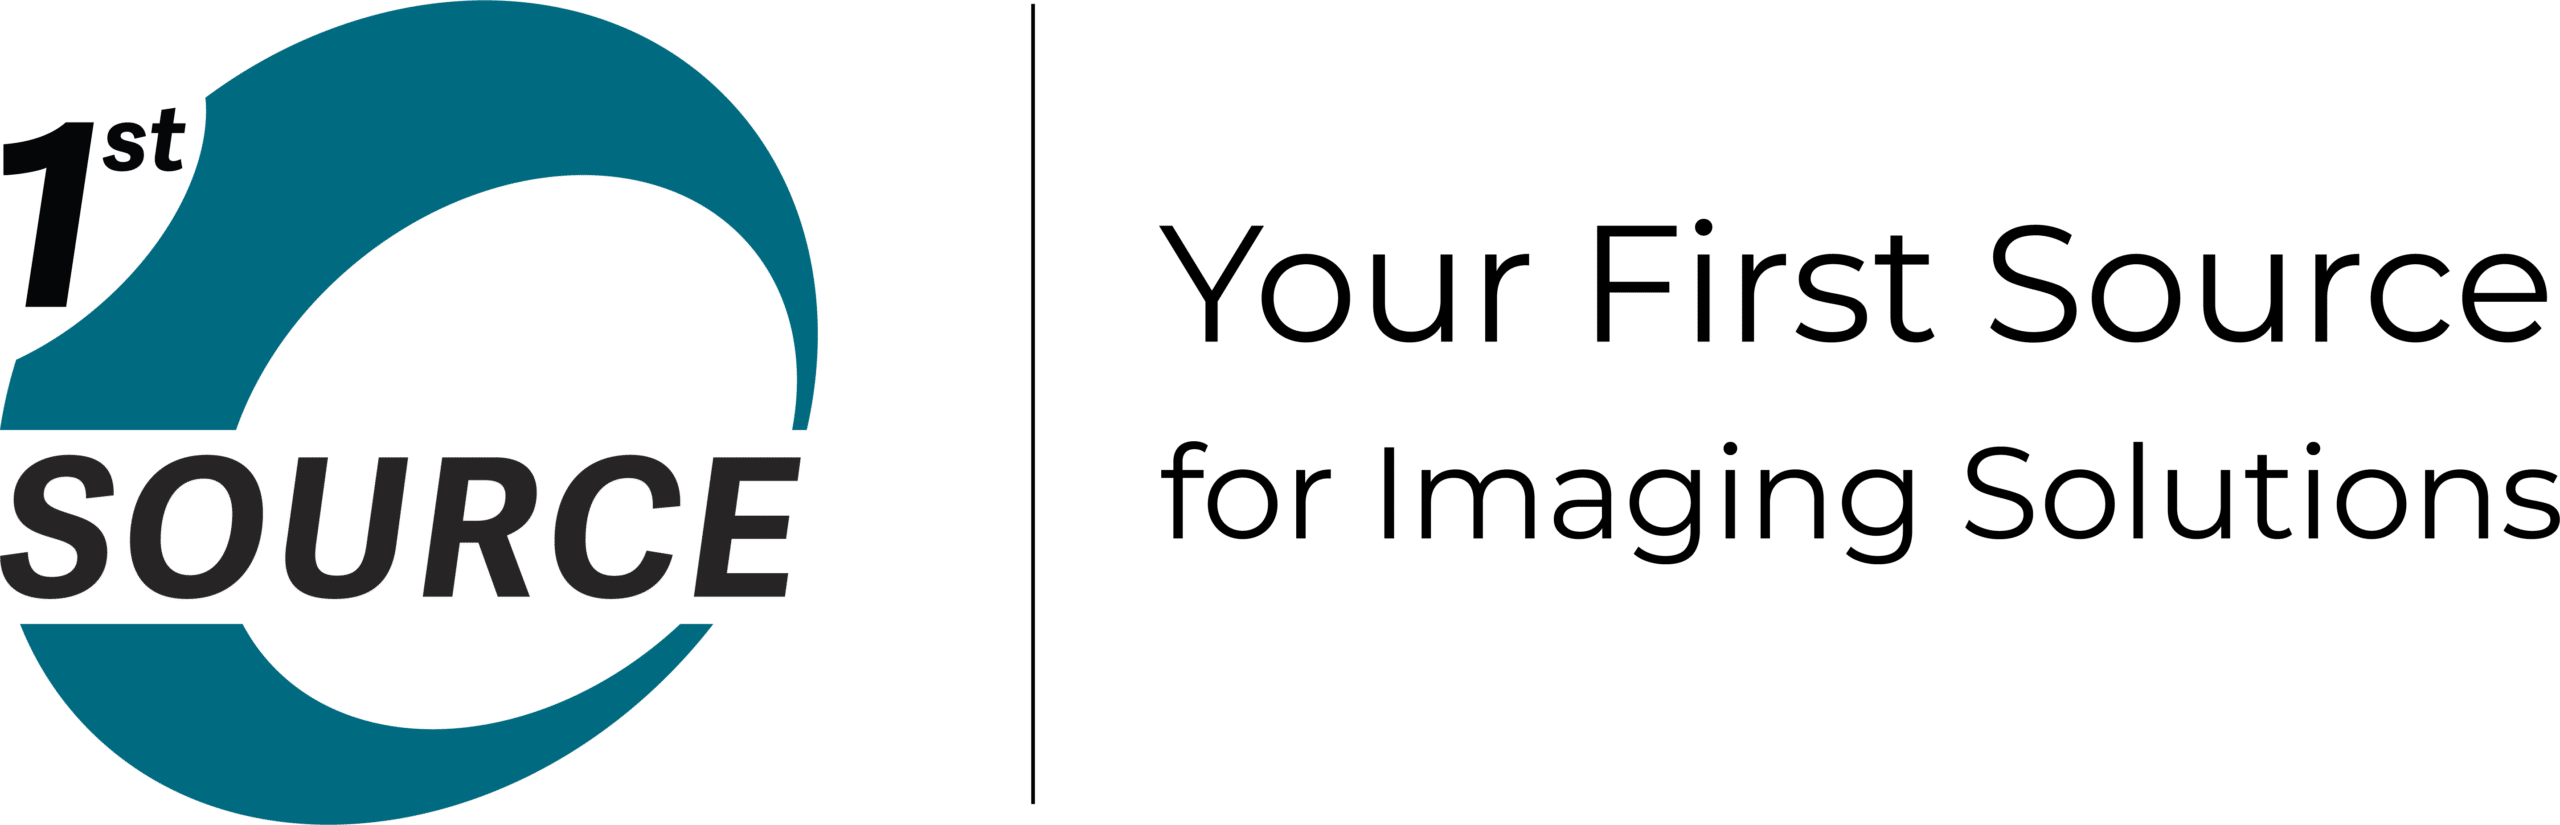 1st Source | Your First Source for Imaging Solutions